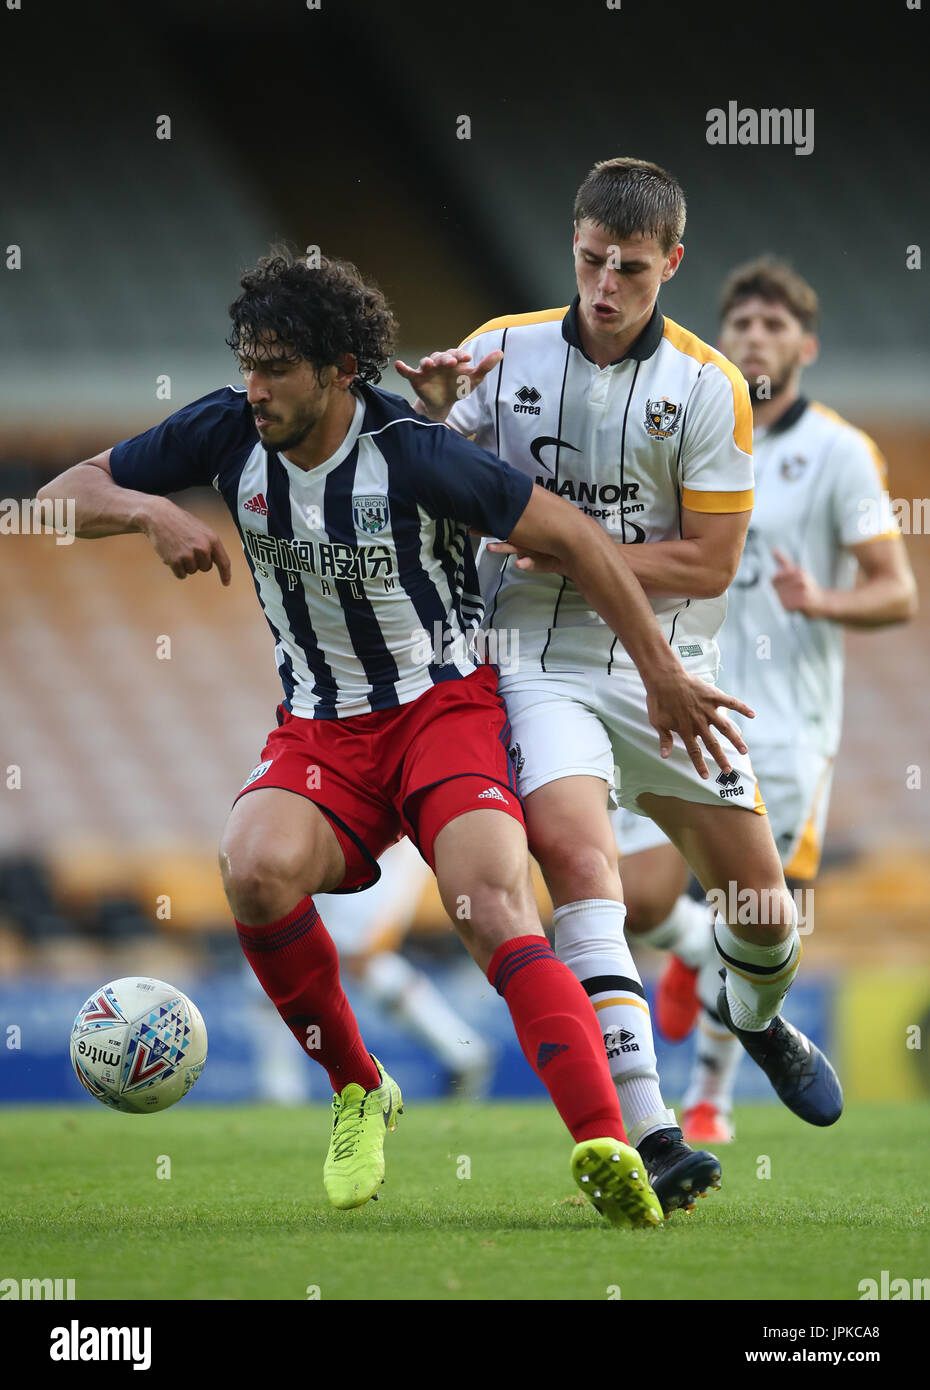 West Bromwich Albion's Ahmed Hegazy holds off challenge from Port Vale's Mike Calverley during the pre-season friendly match at Vale Park, Stoke. Stock Photo